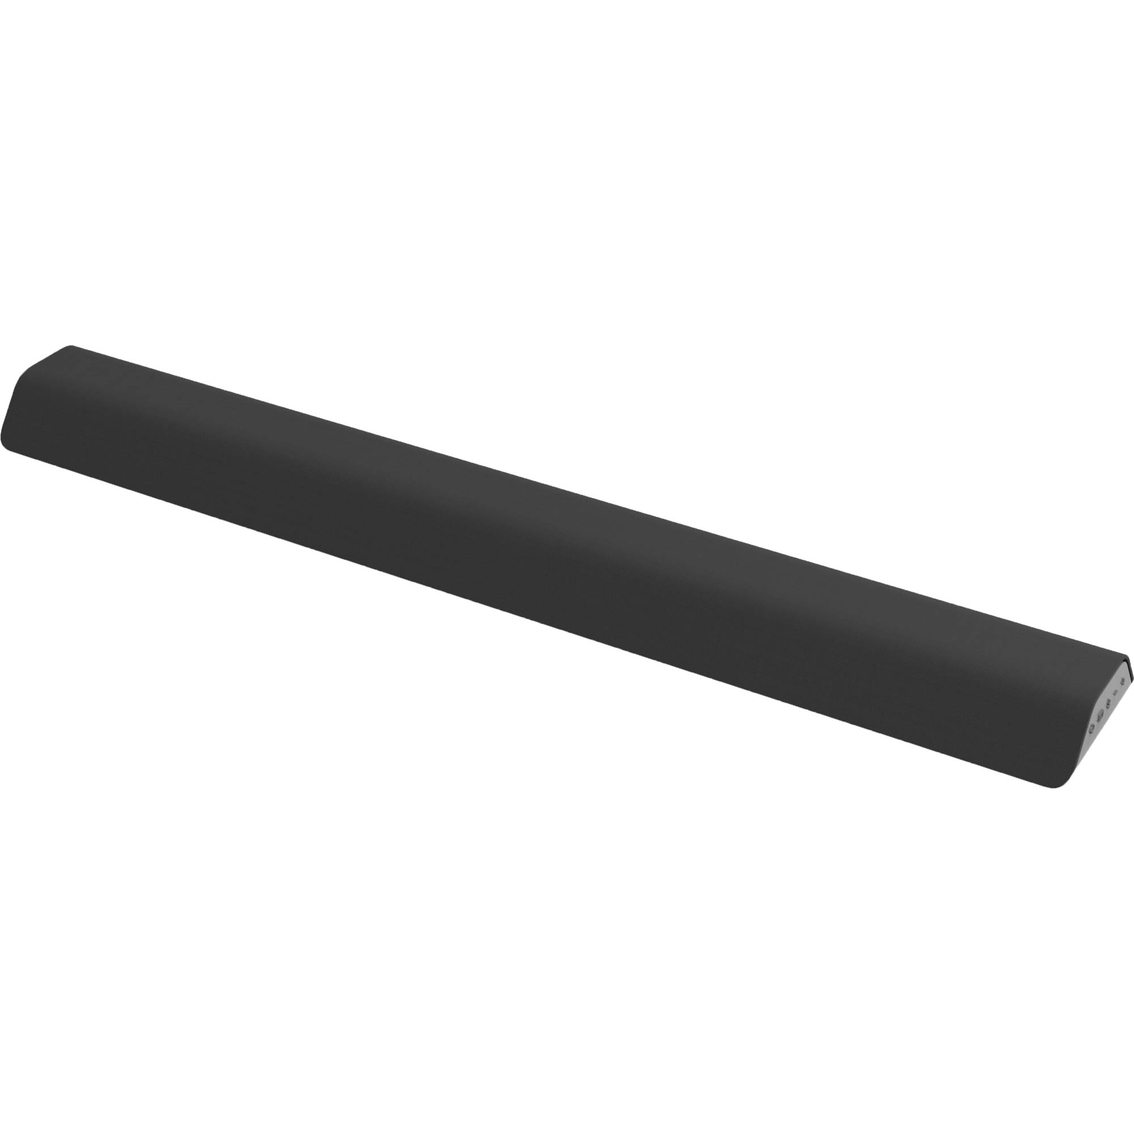 Vizio M-Series All-In-One 2.1 Sound Bar with Dolby Atmos and DTS:X - Image 4 of 8